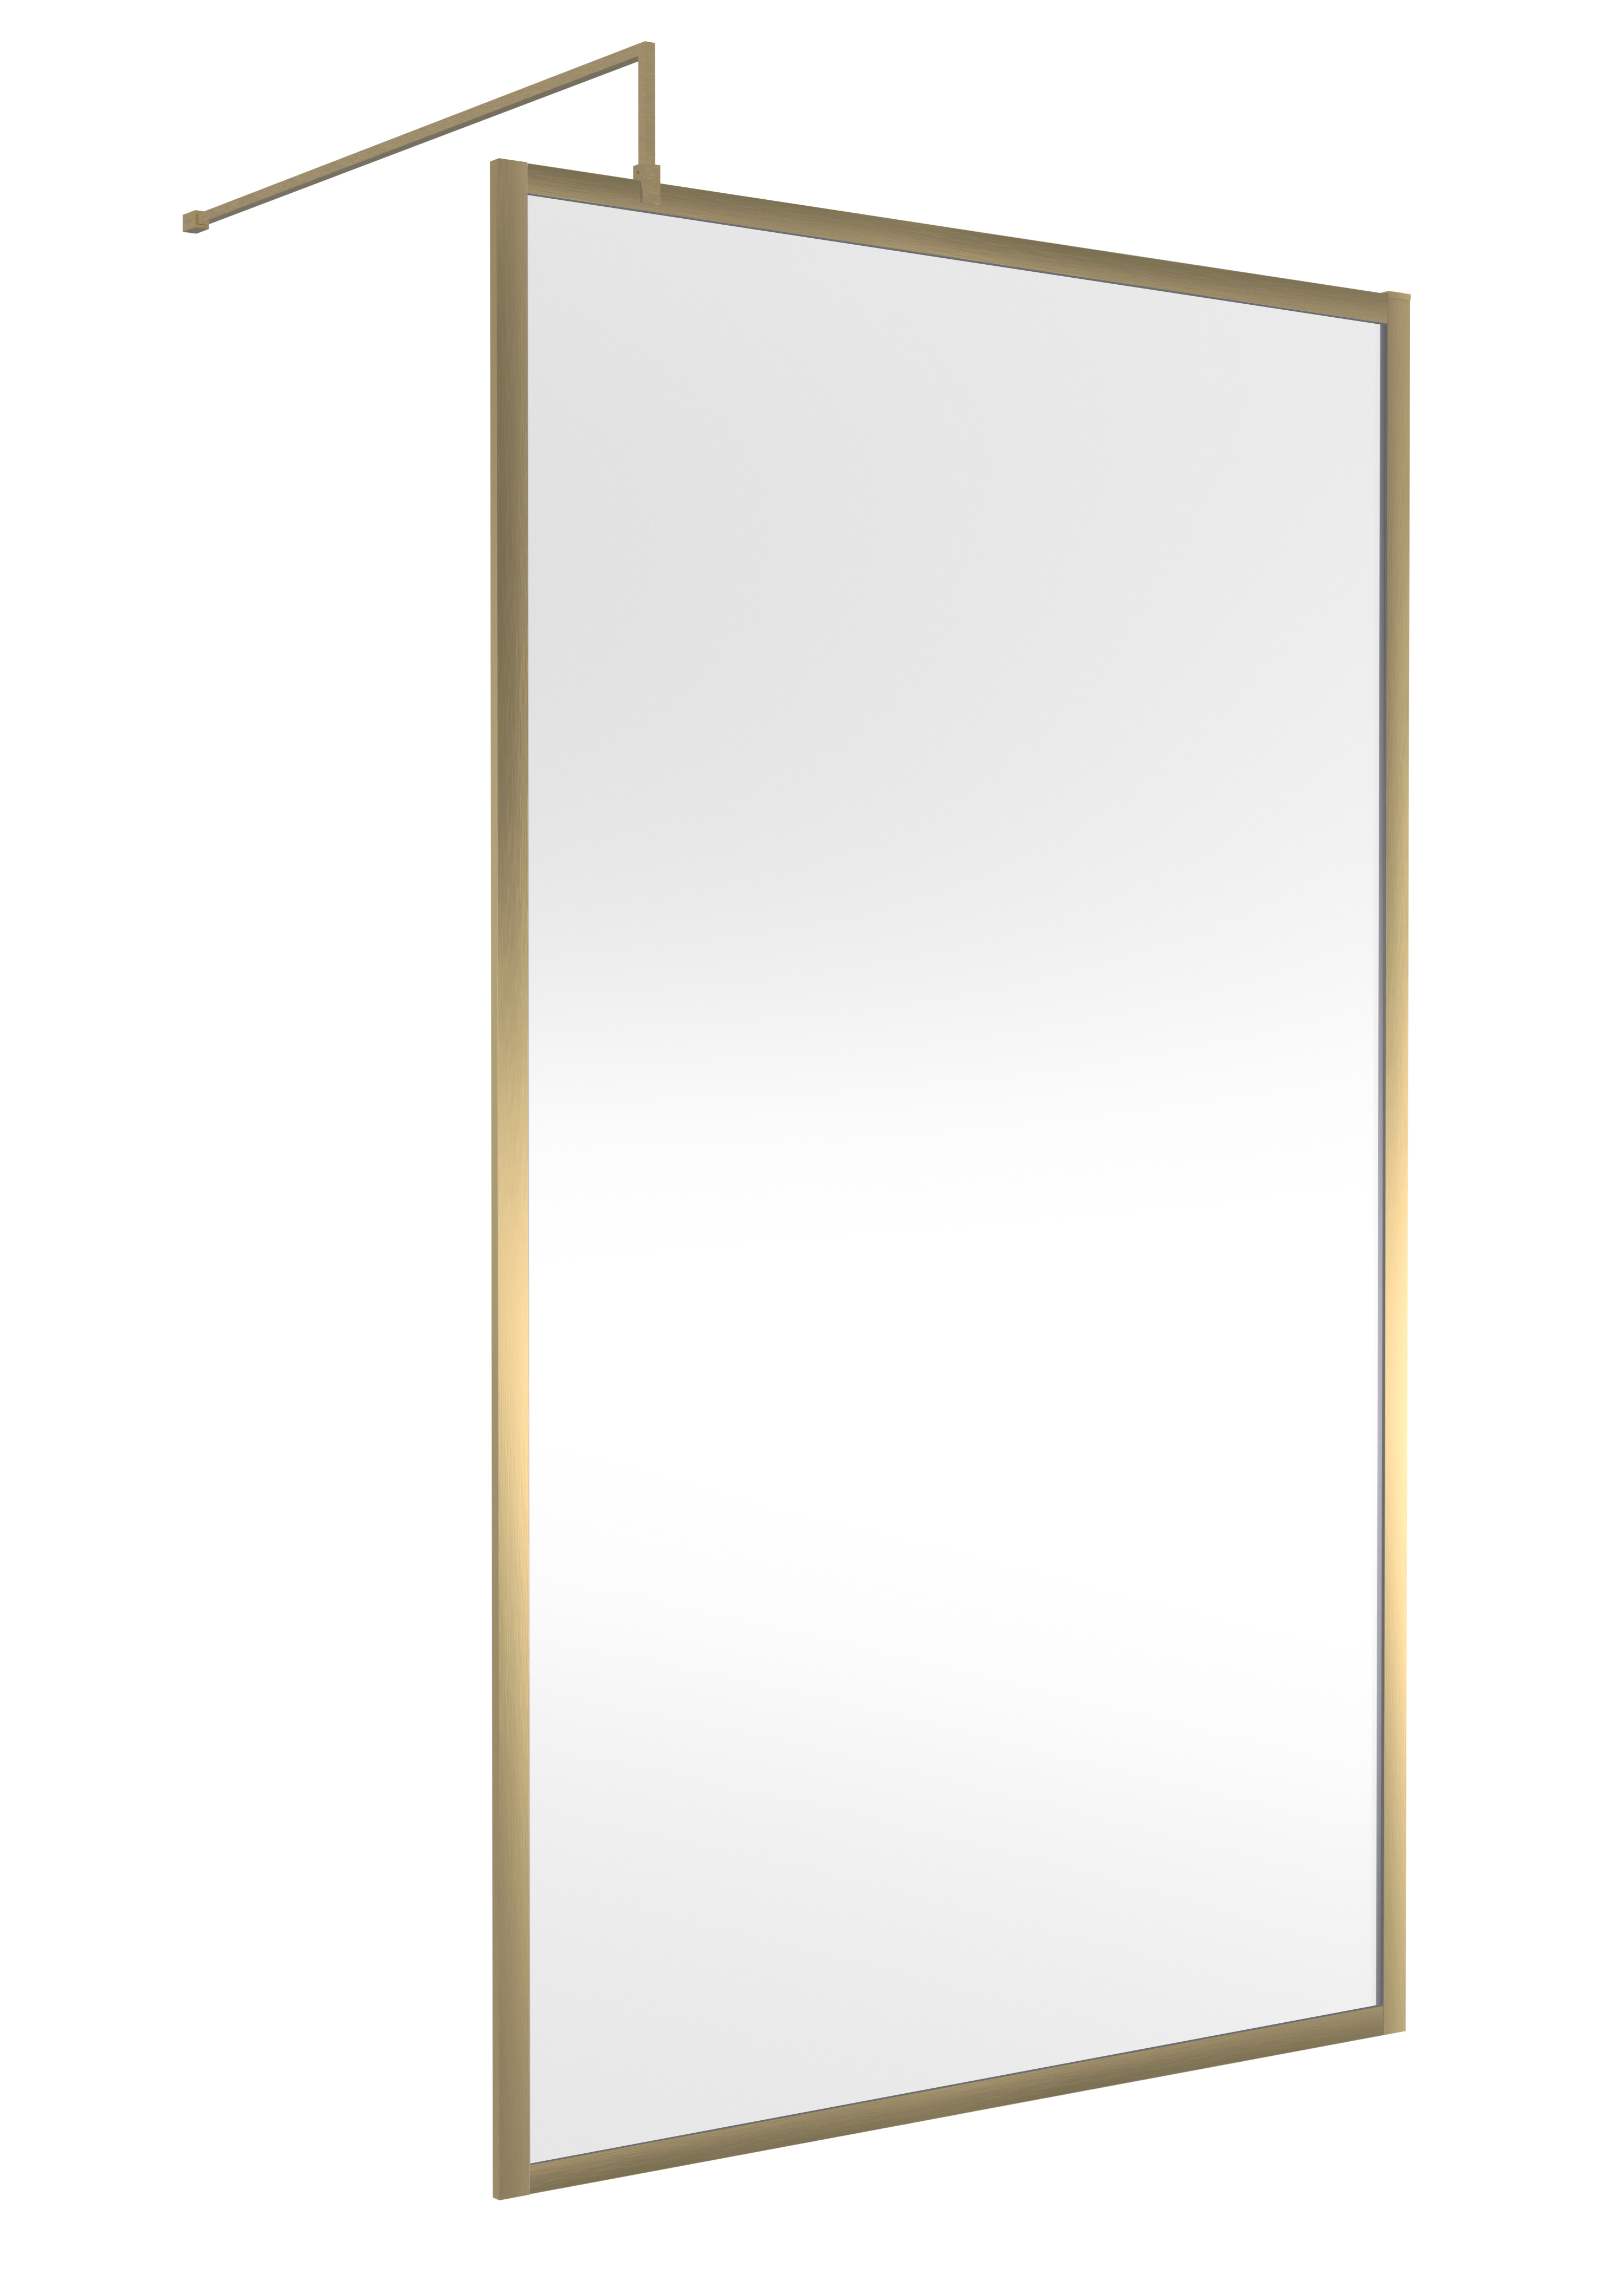 Hudson Reed Full Outer Frame Wetroom Screen 1950x1200x8mm - Brushed Brass (18996)